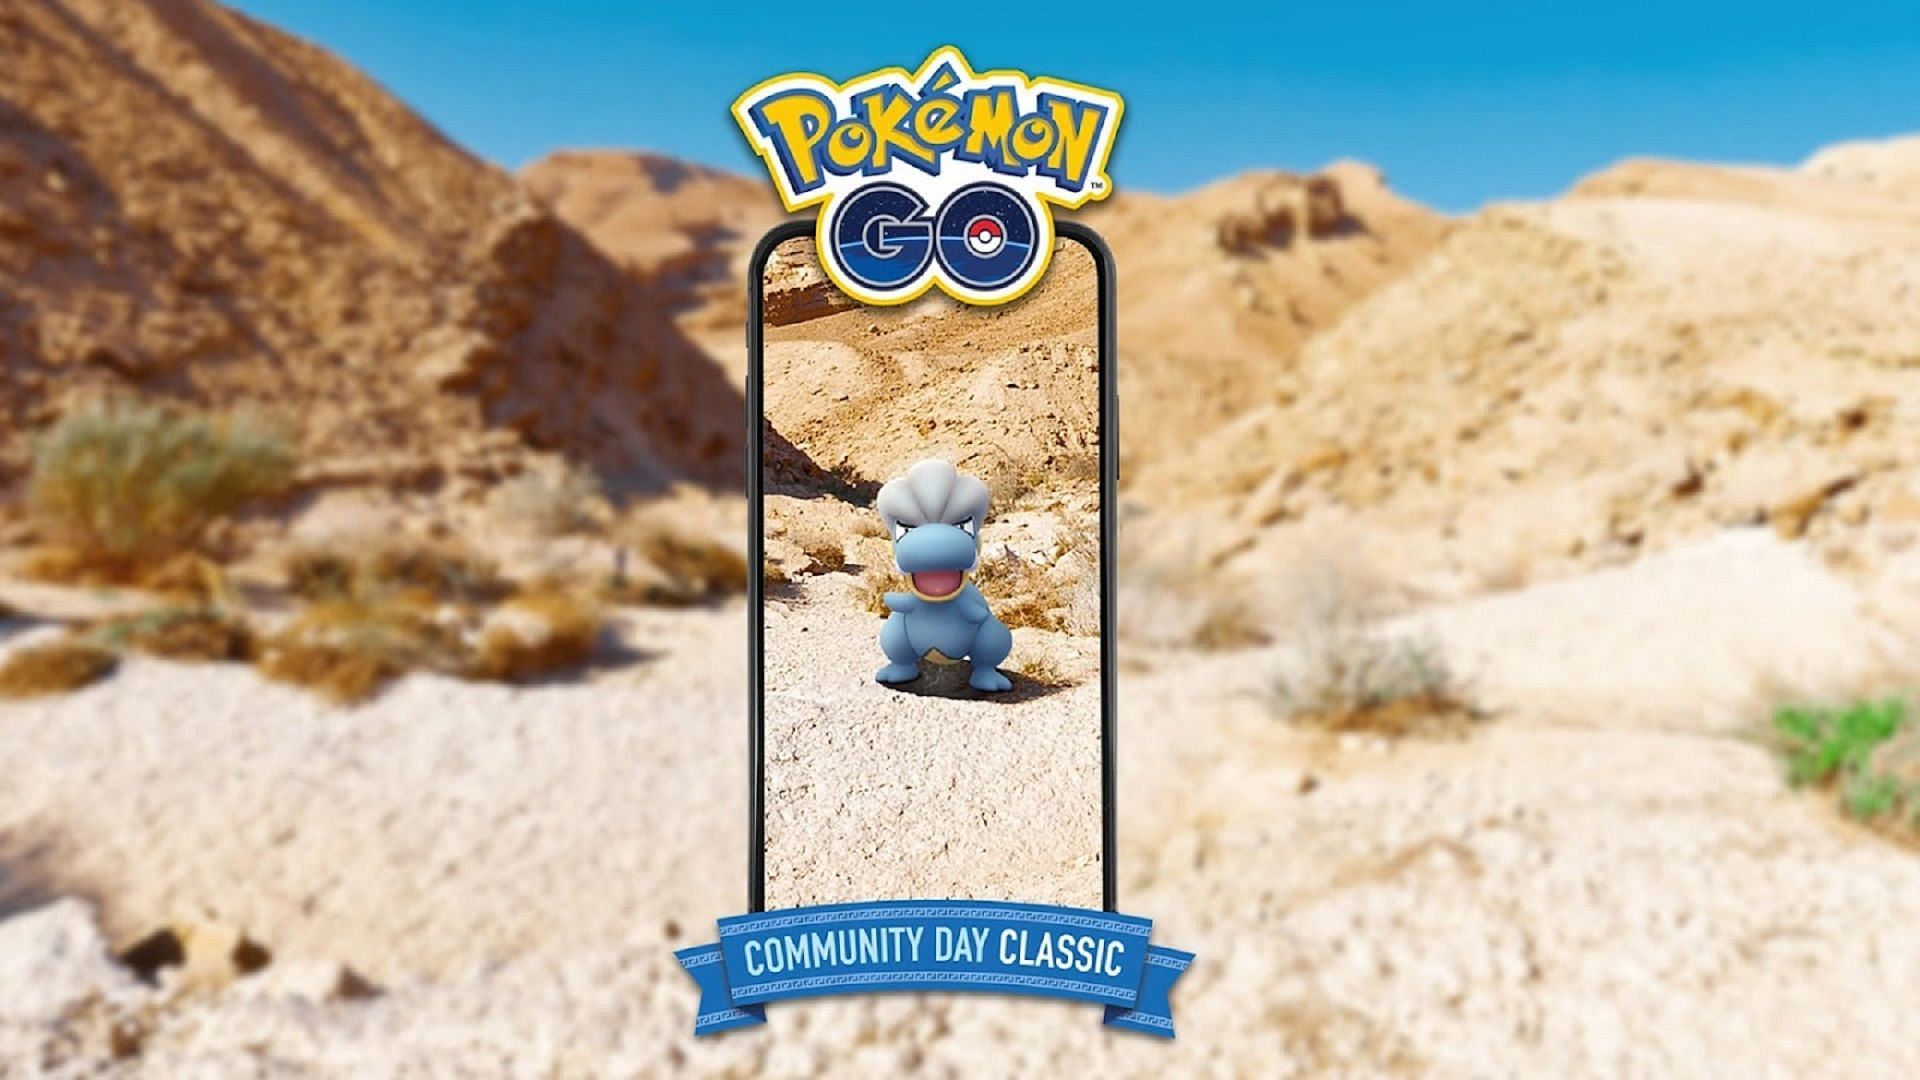 Salamence fans were likely thrilled with this Pokemon GO Community Day. (Image via Niantic)